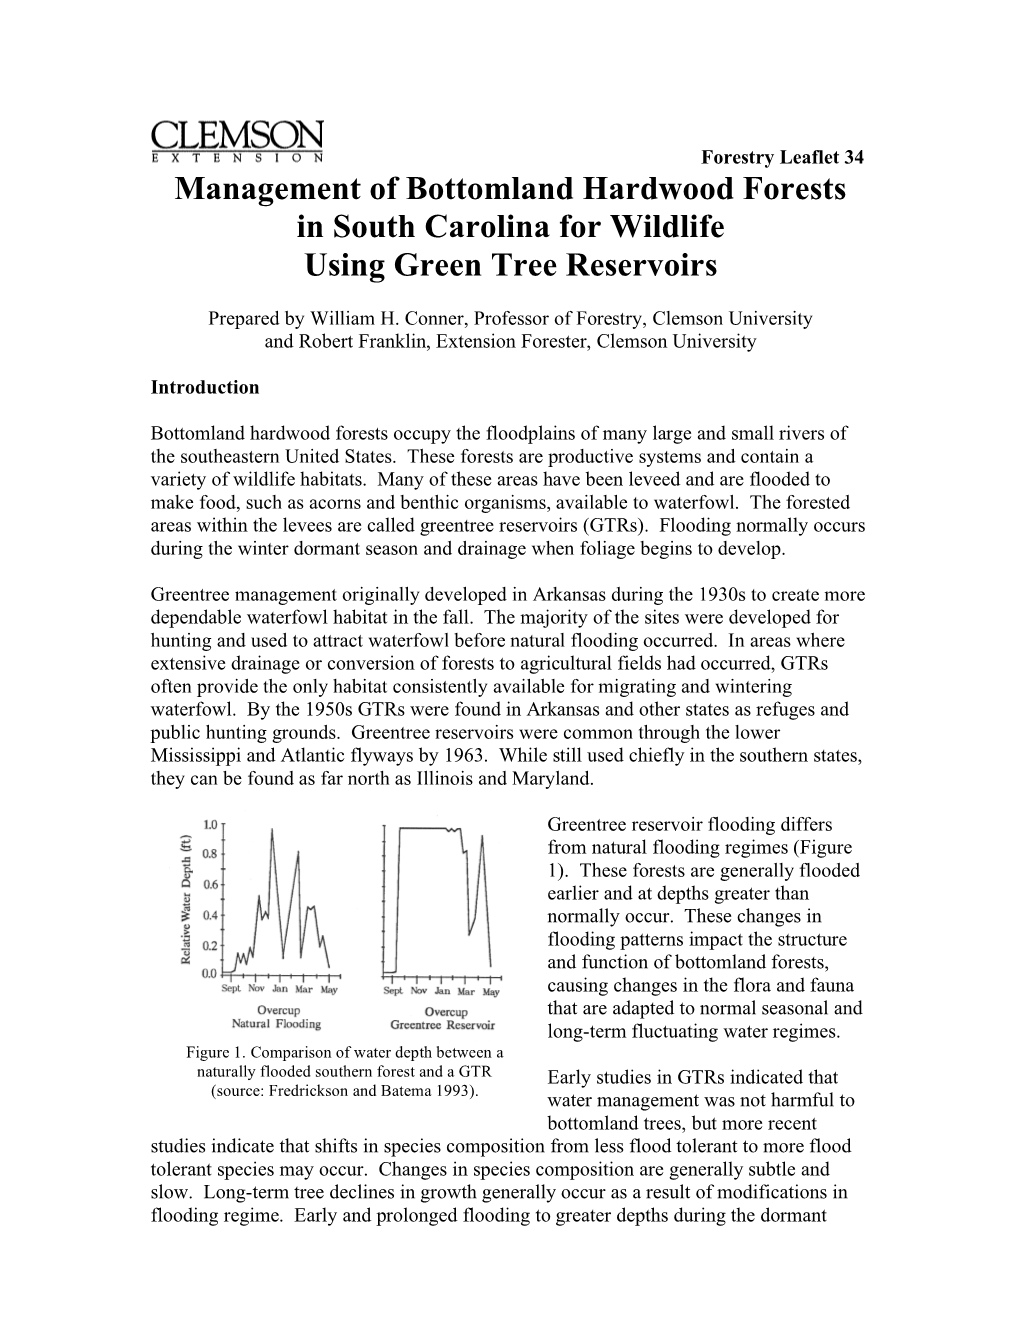 Management of Bottomland Hardwood Forests in South Carolina for Wildlife Using Green Tree Reservoirs